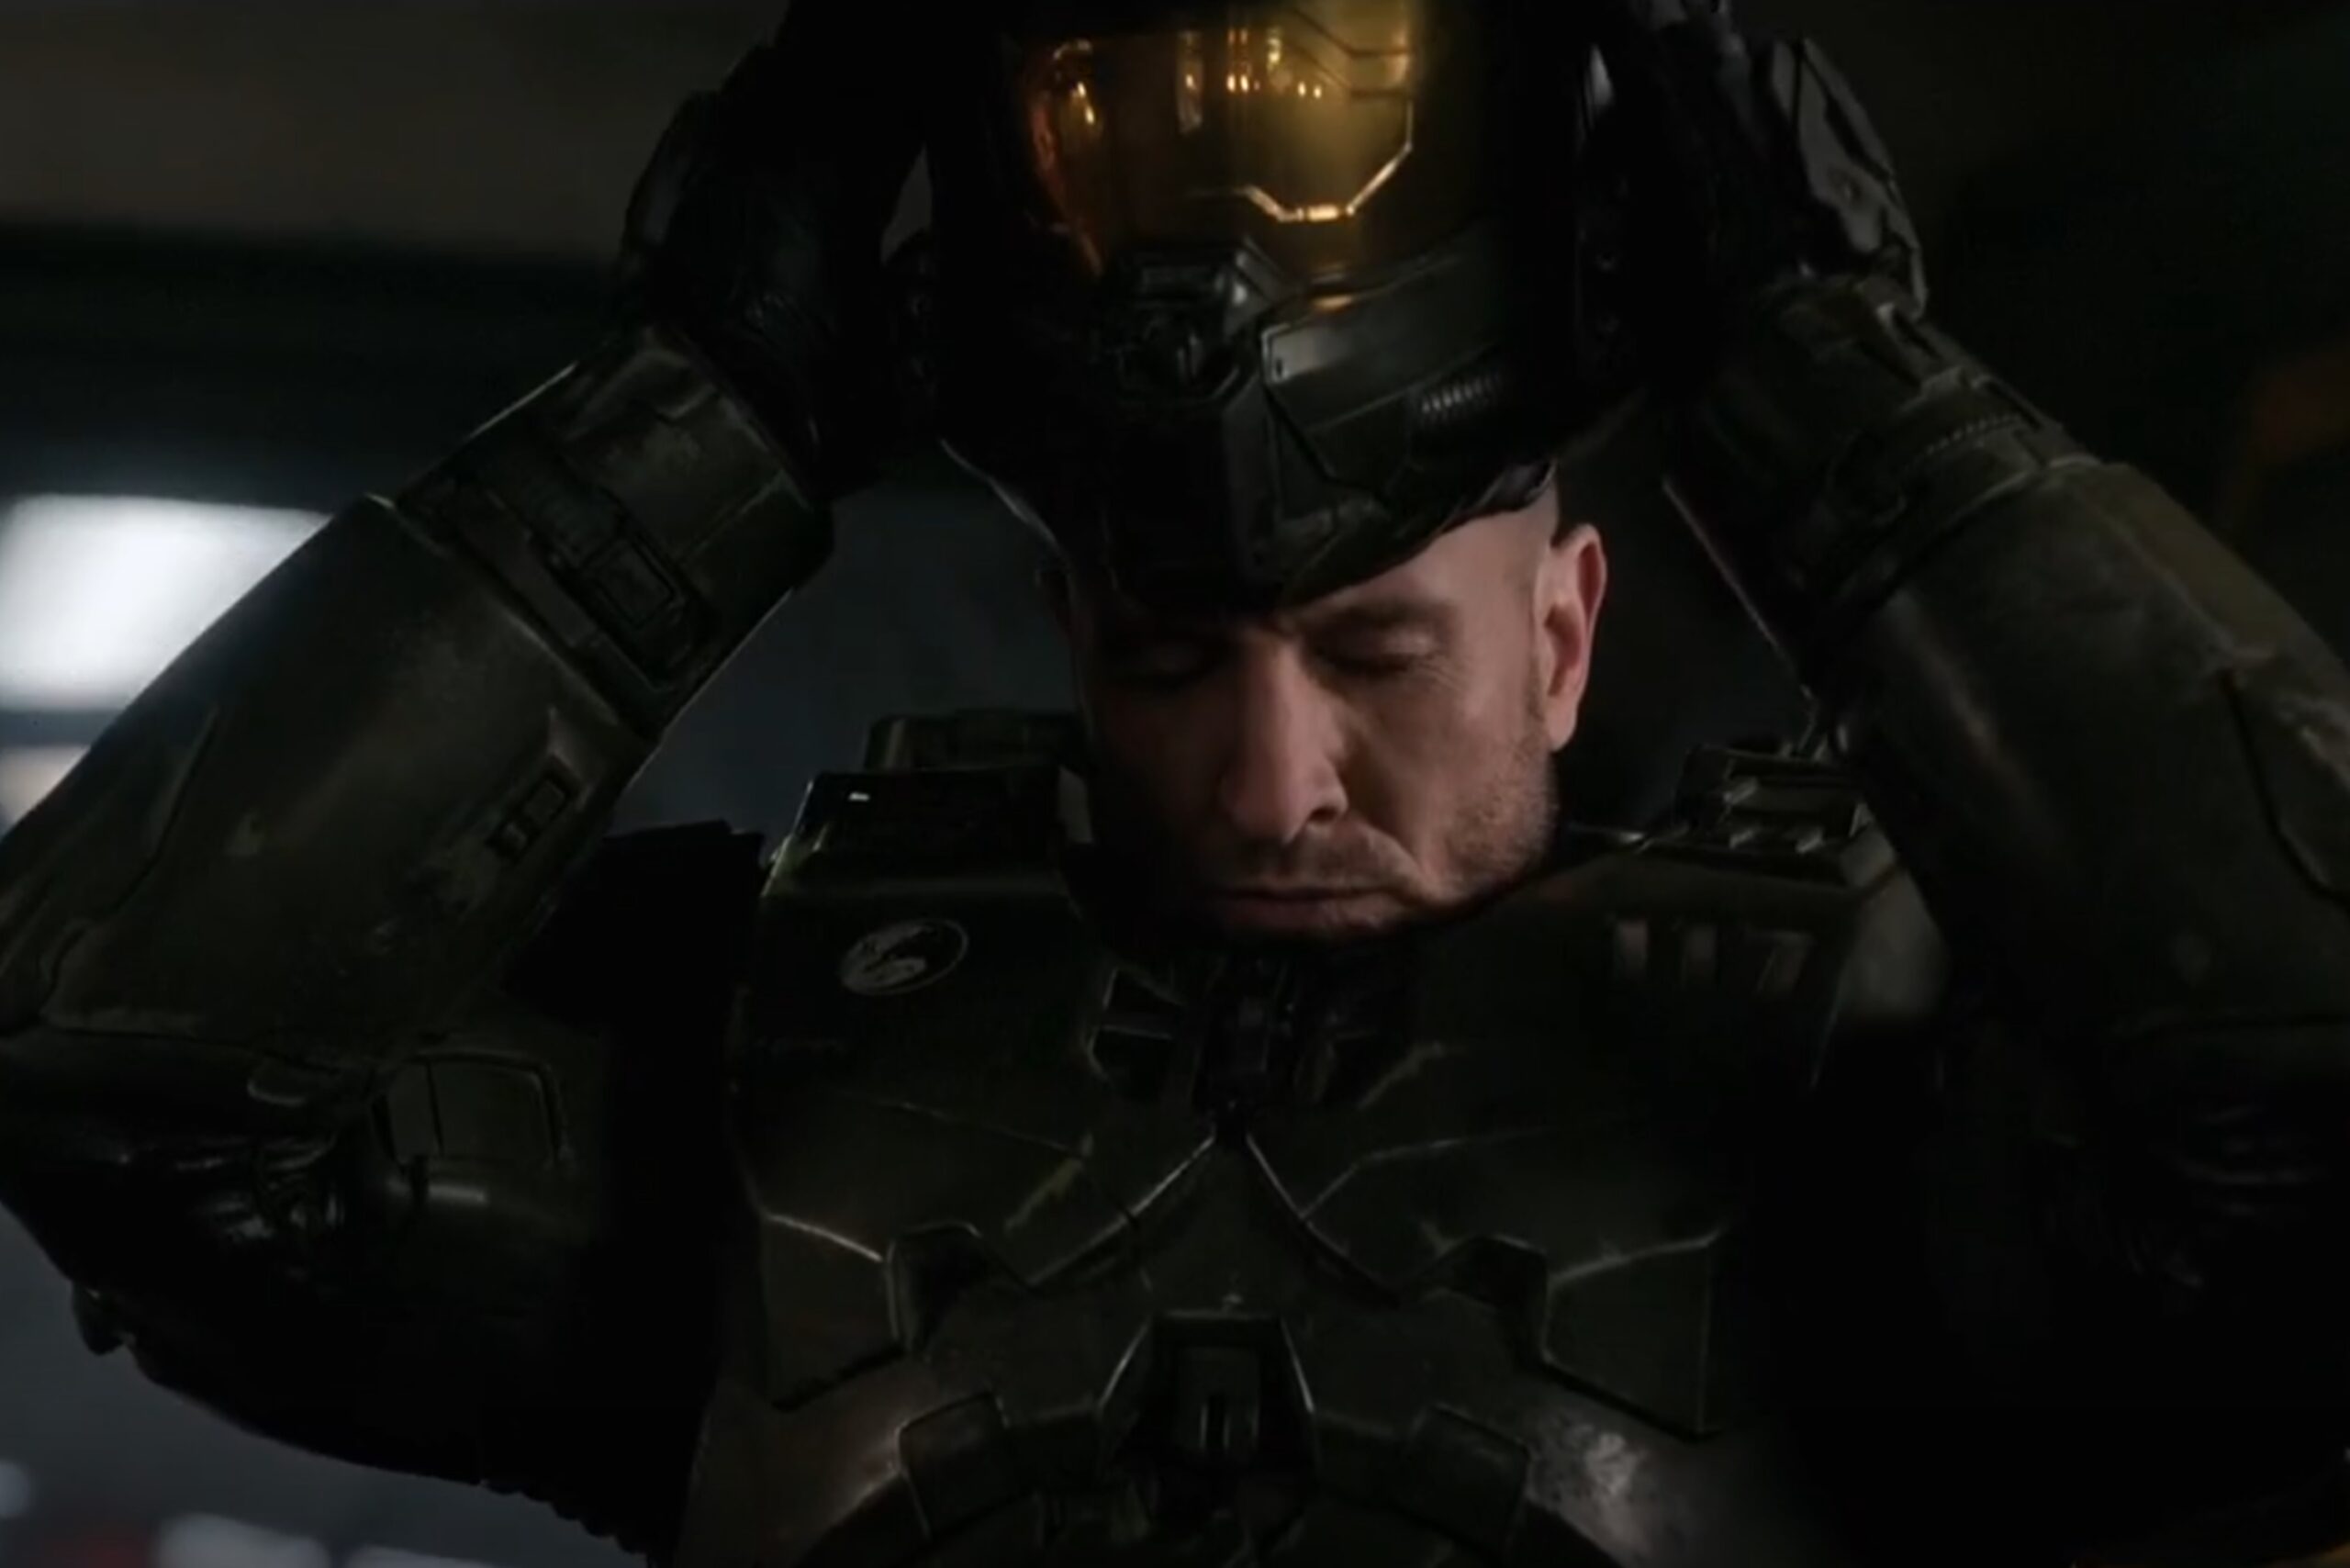 Halo TV still of the Master Chief putting his helmet on.